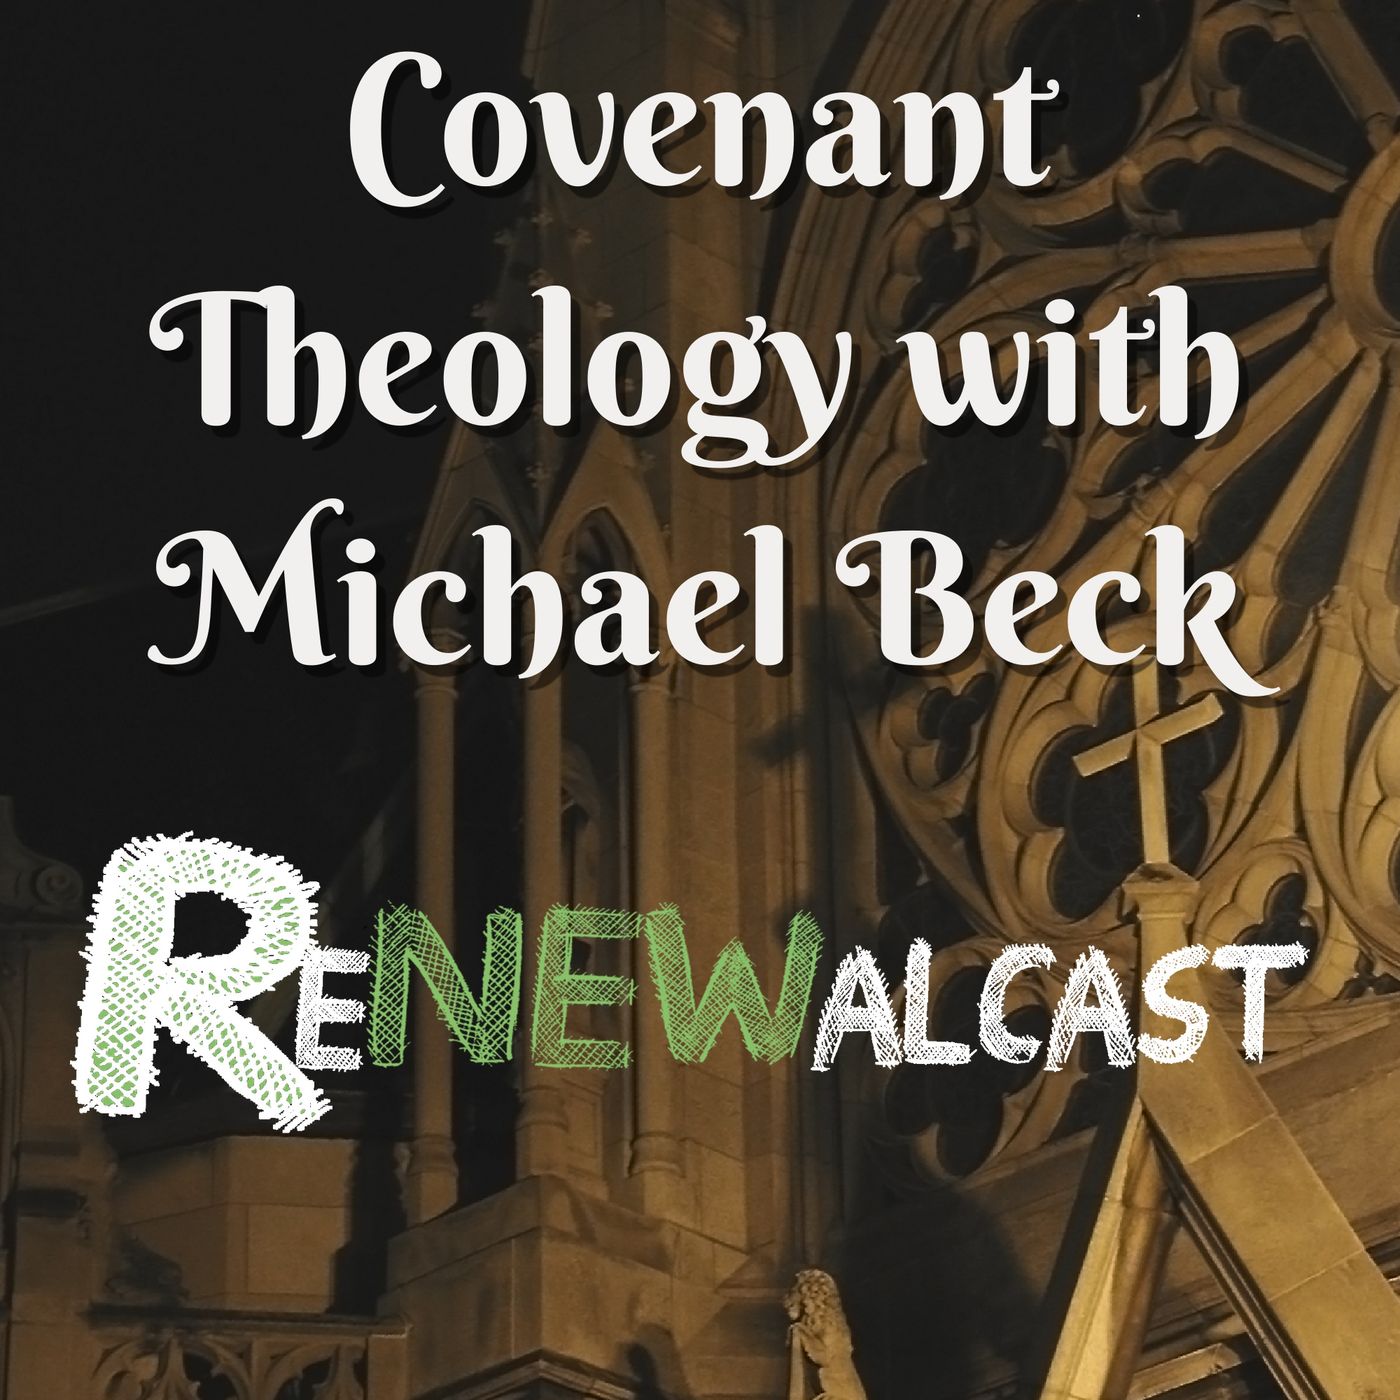 Covenant Theology with Michael Beck